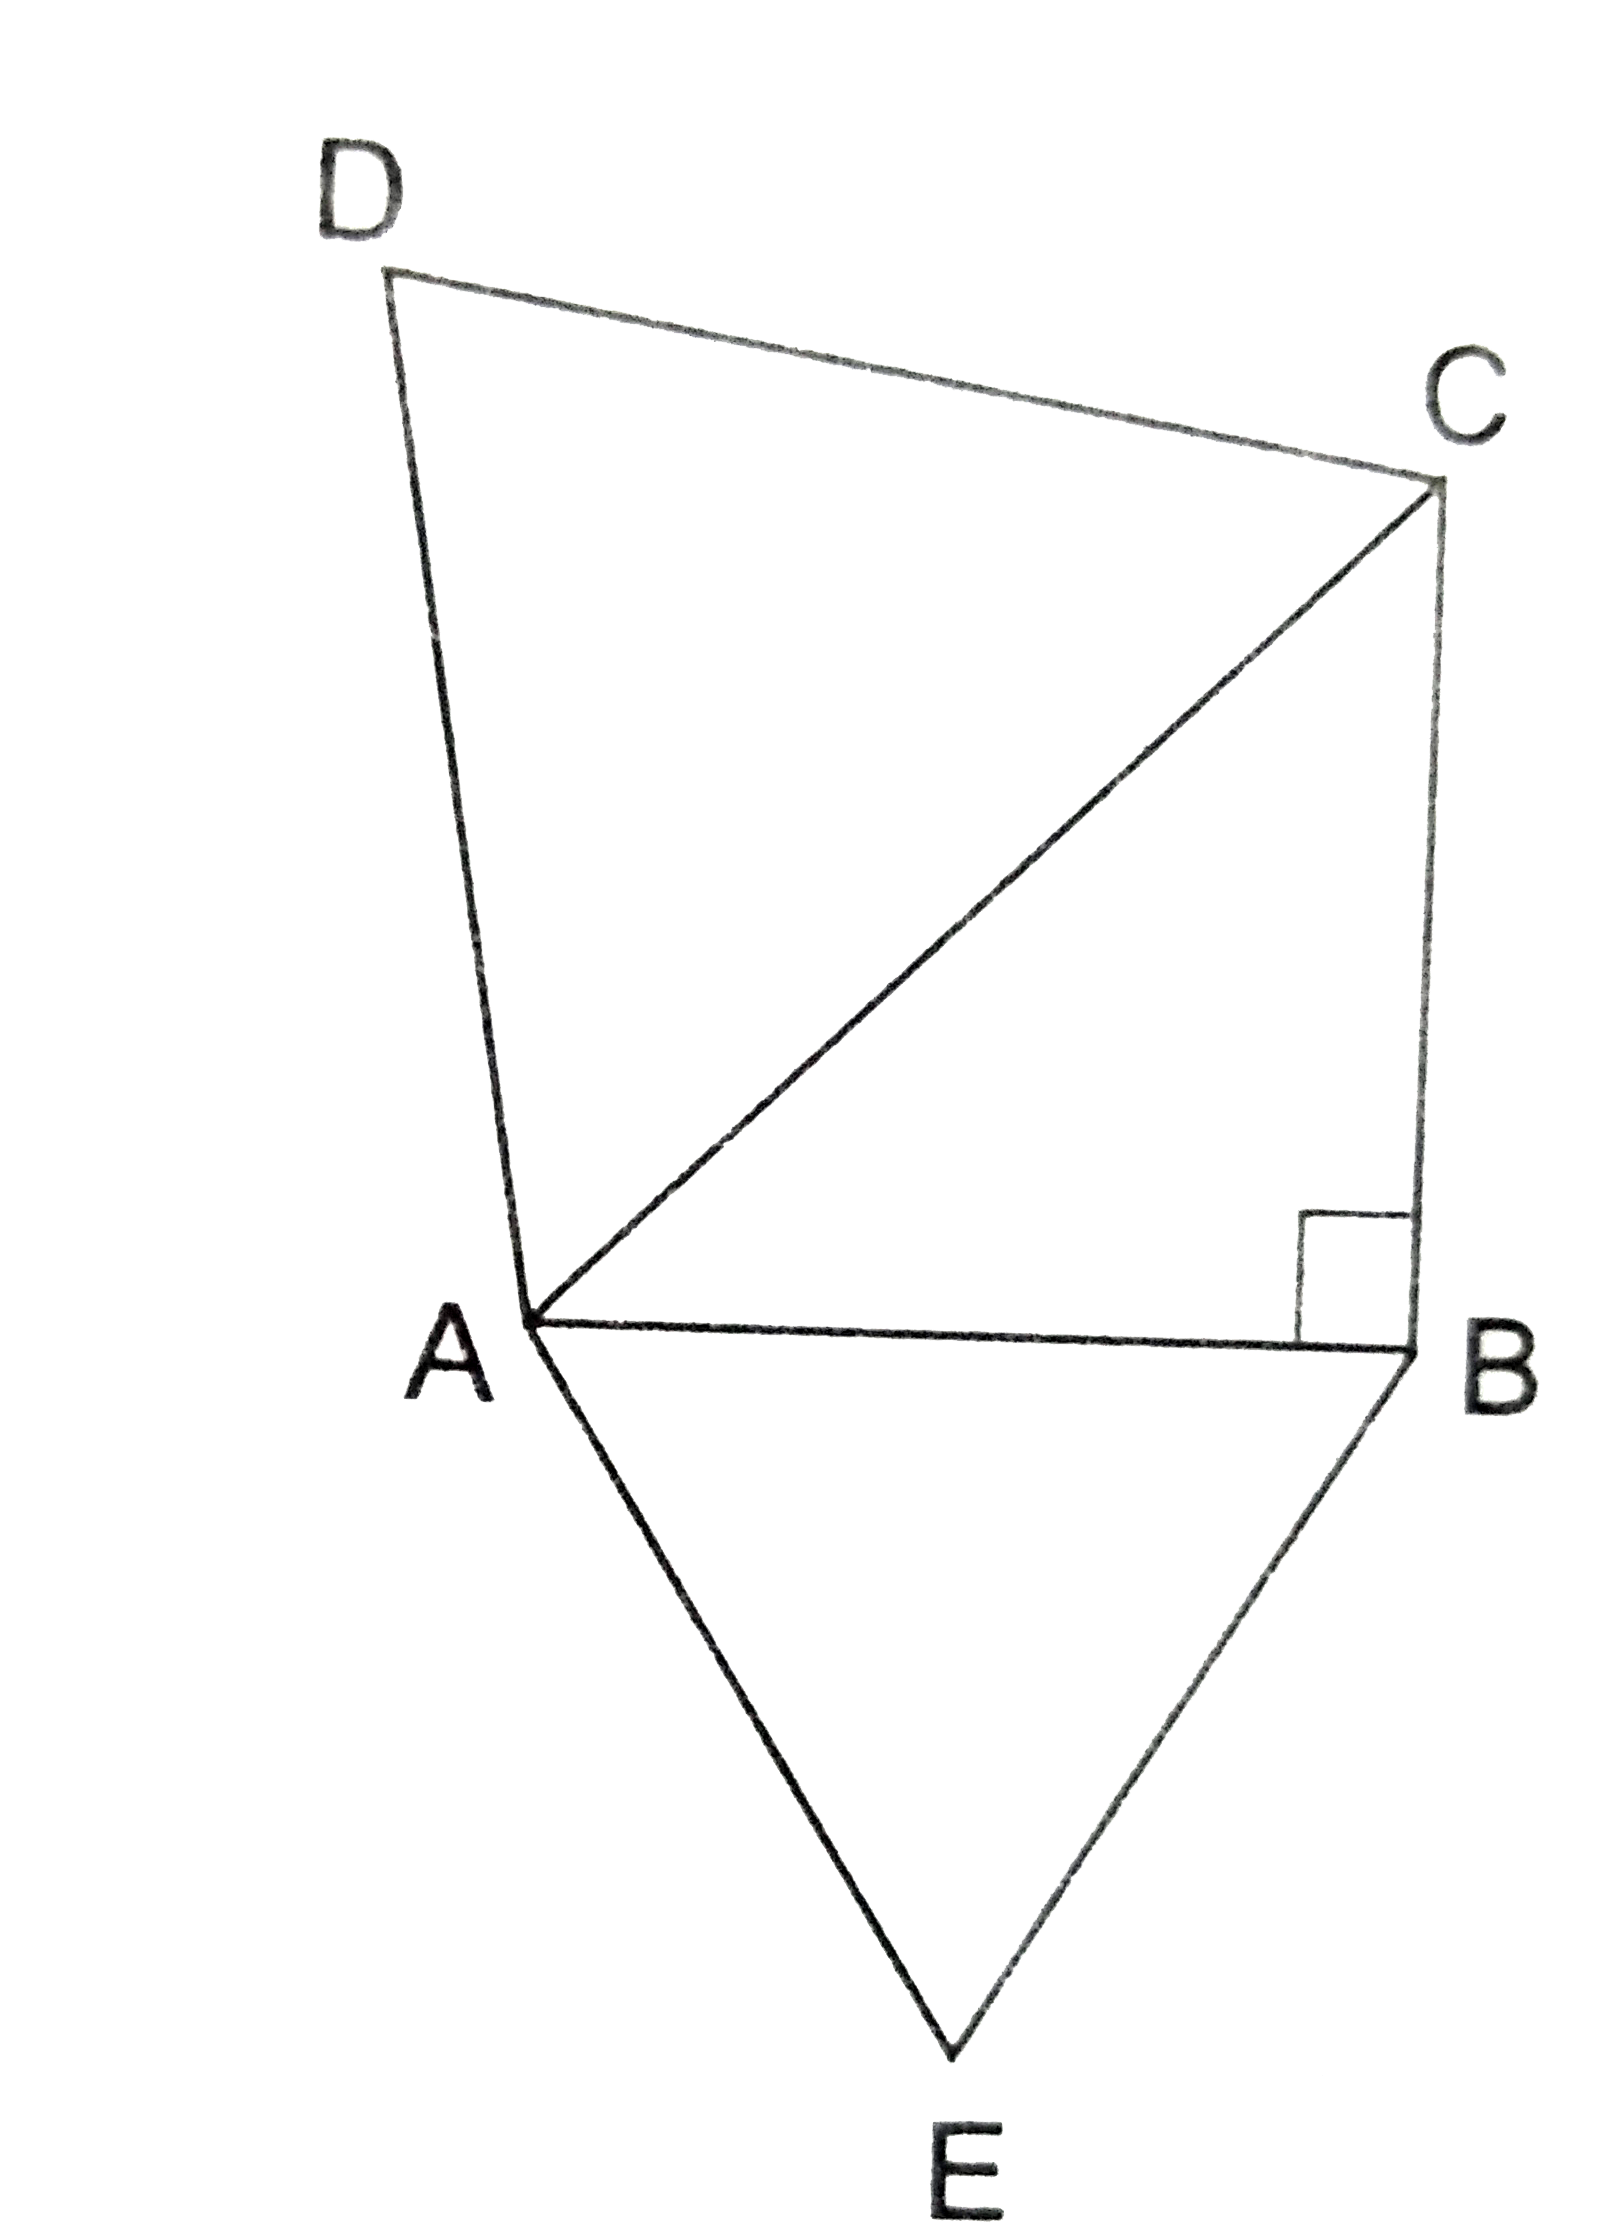 ABC is an isosceles triangle, right-angled at B. Similar trianles ACD and ABE are constructed on sides AC and AB. Find ratio  between the areas of Delta ABC and Delta ACD.